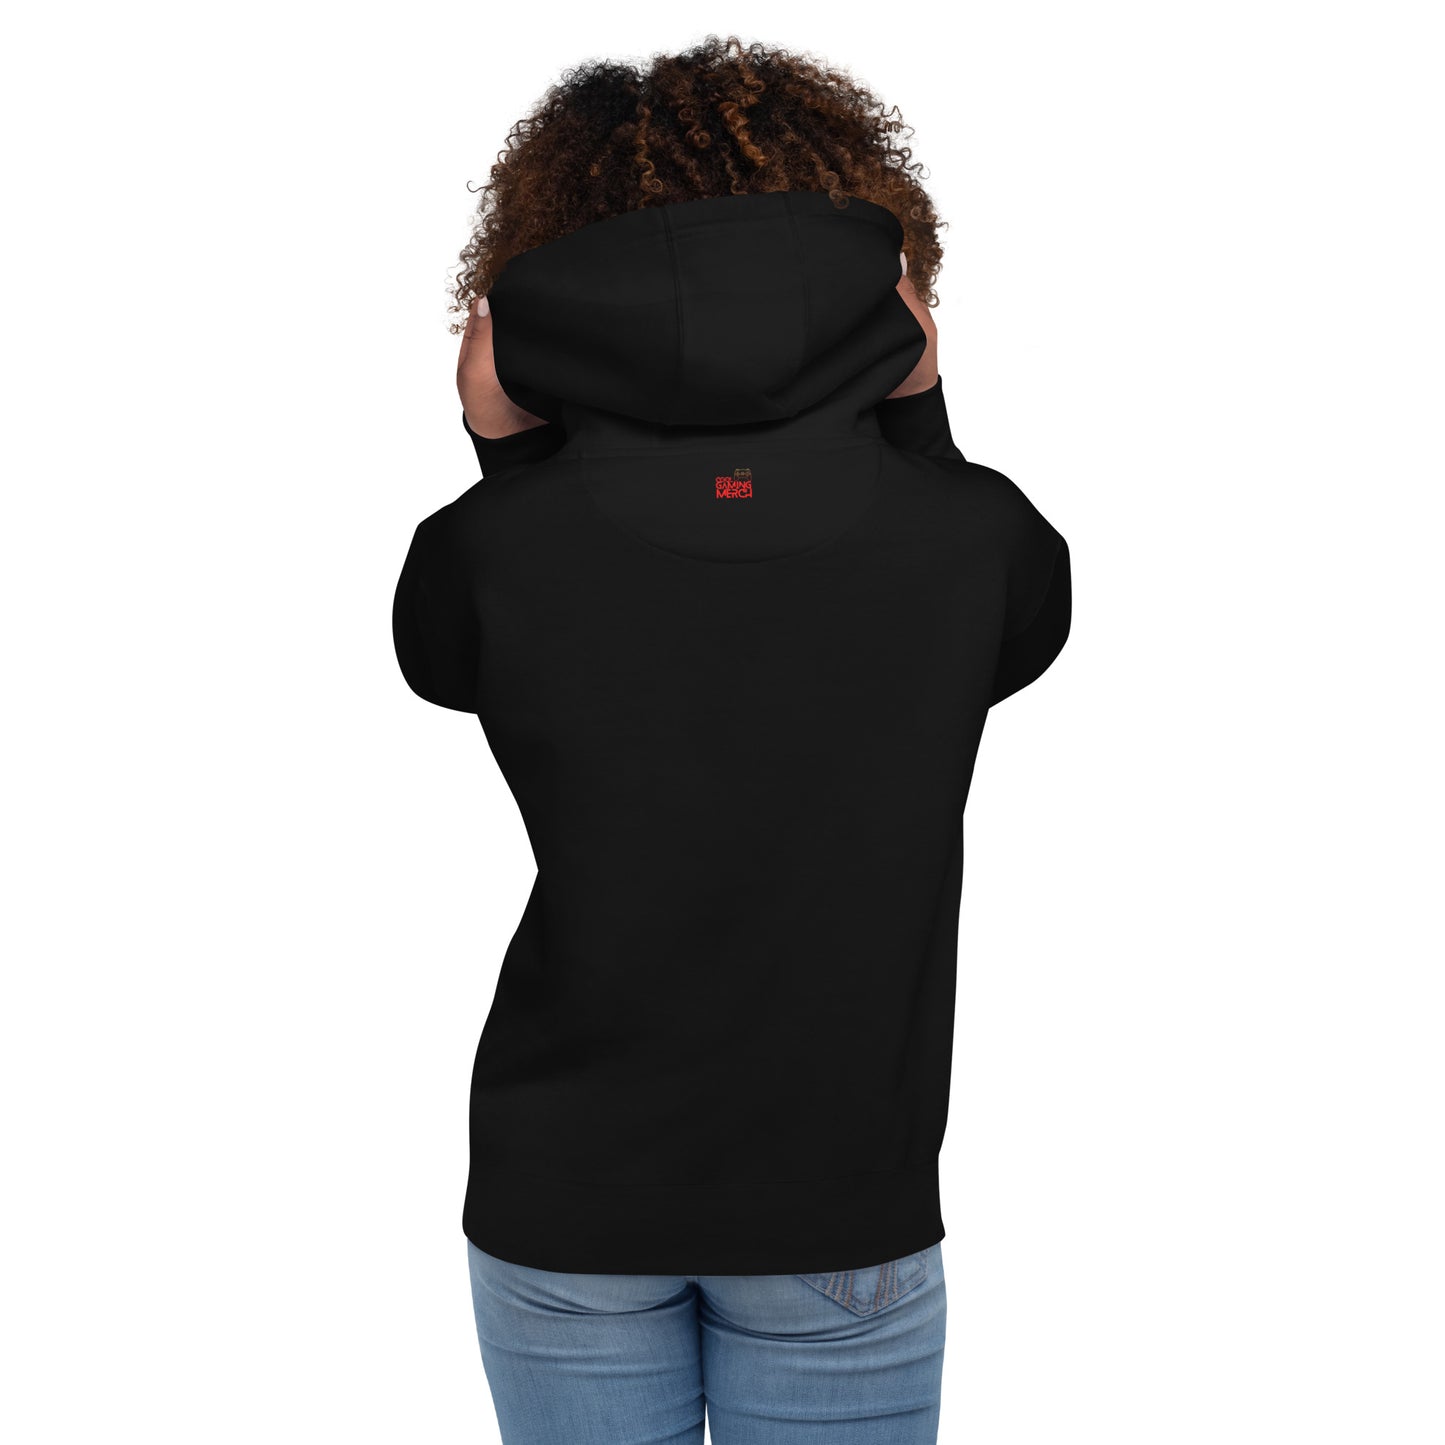 Woman, facing away in black hoodie with outside label